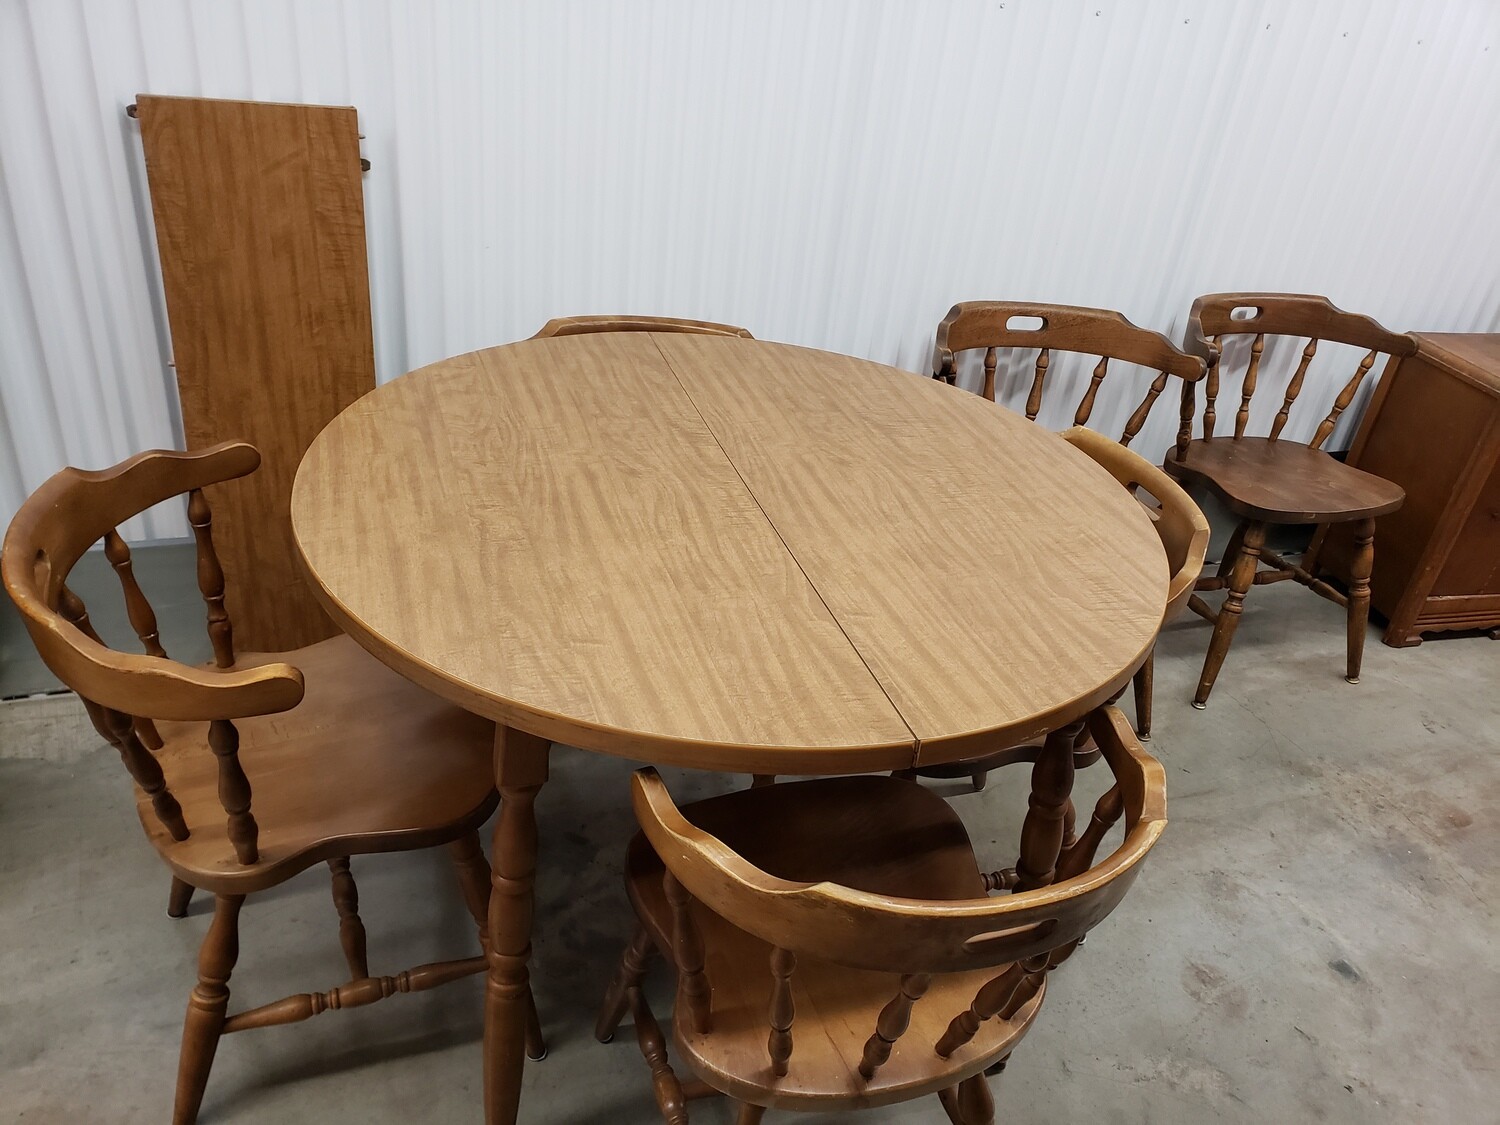 42" Round Kitchen Table extends, 6 chairs  #2114